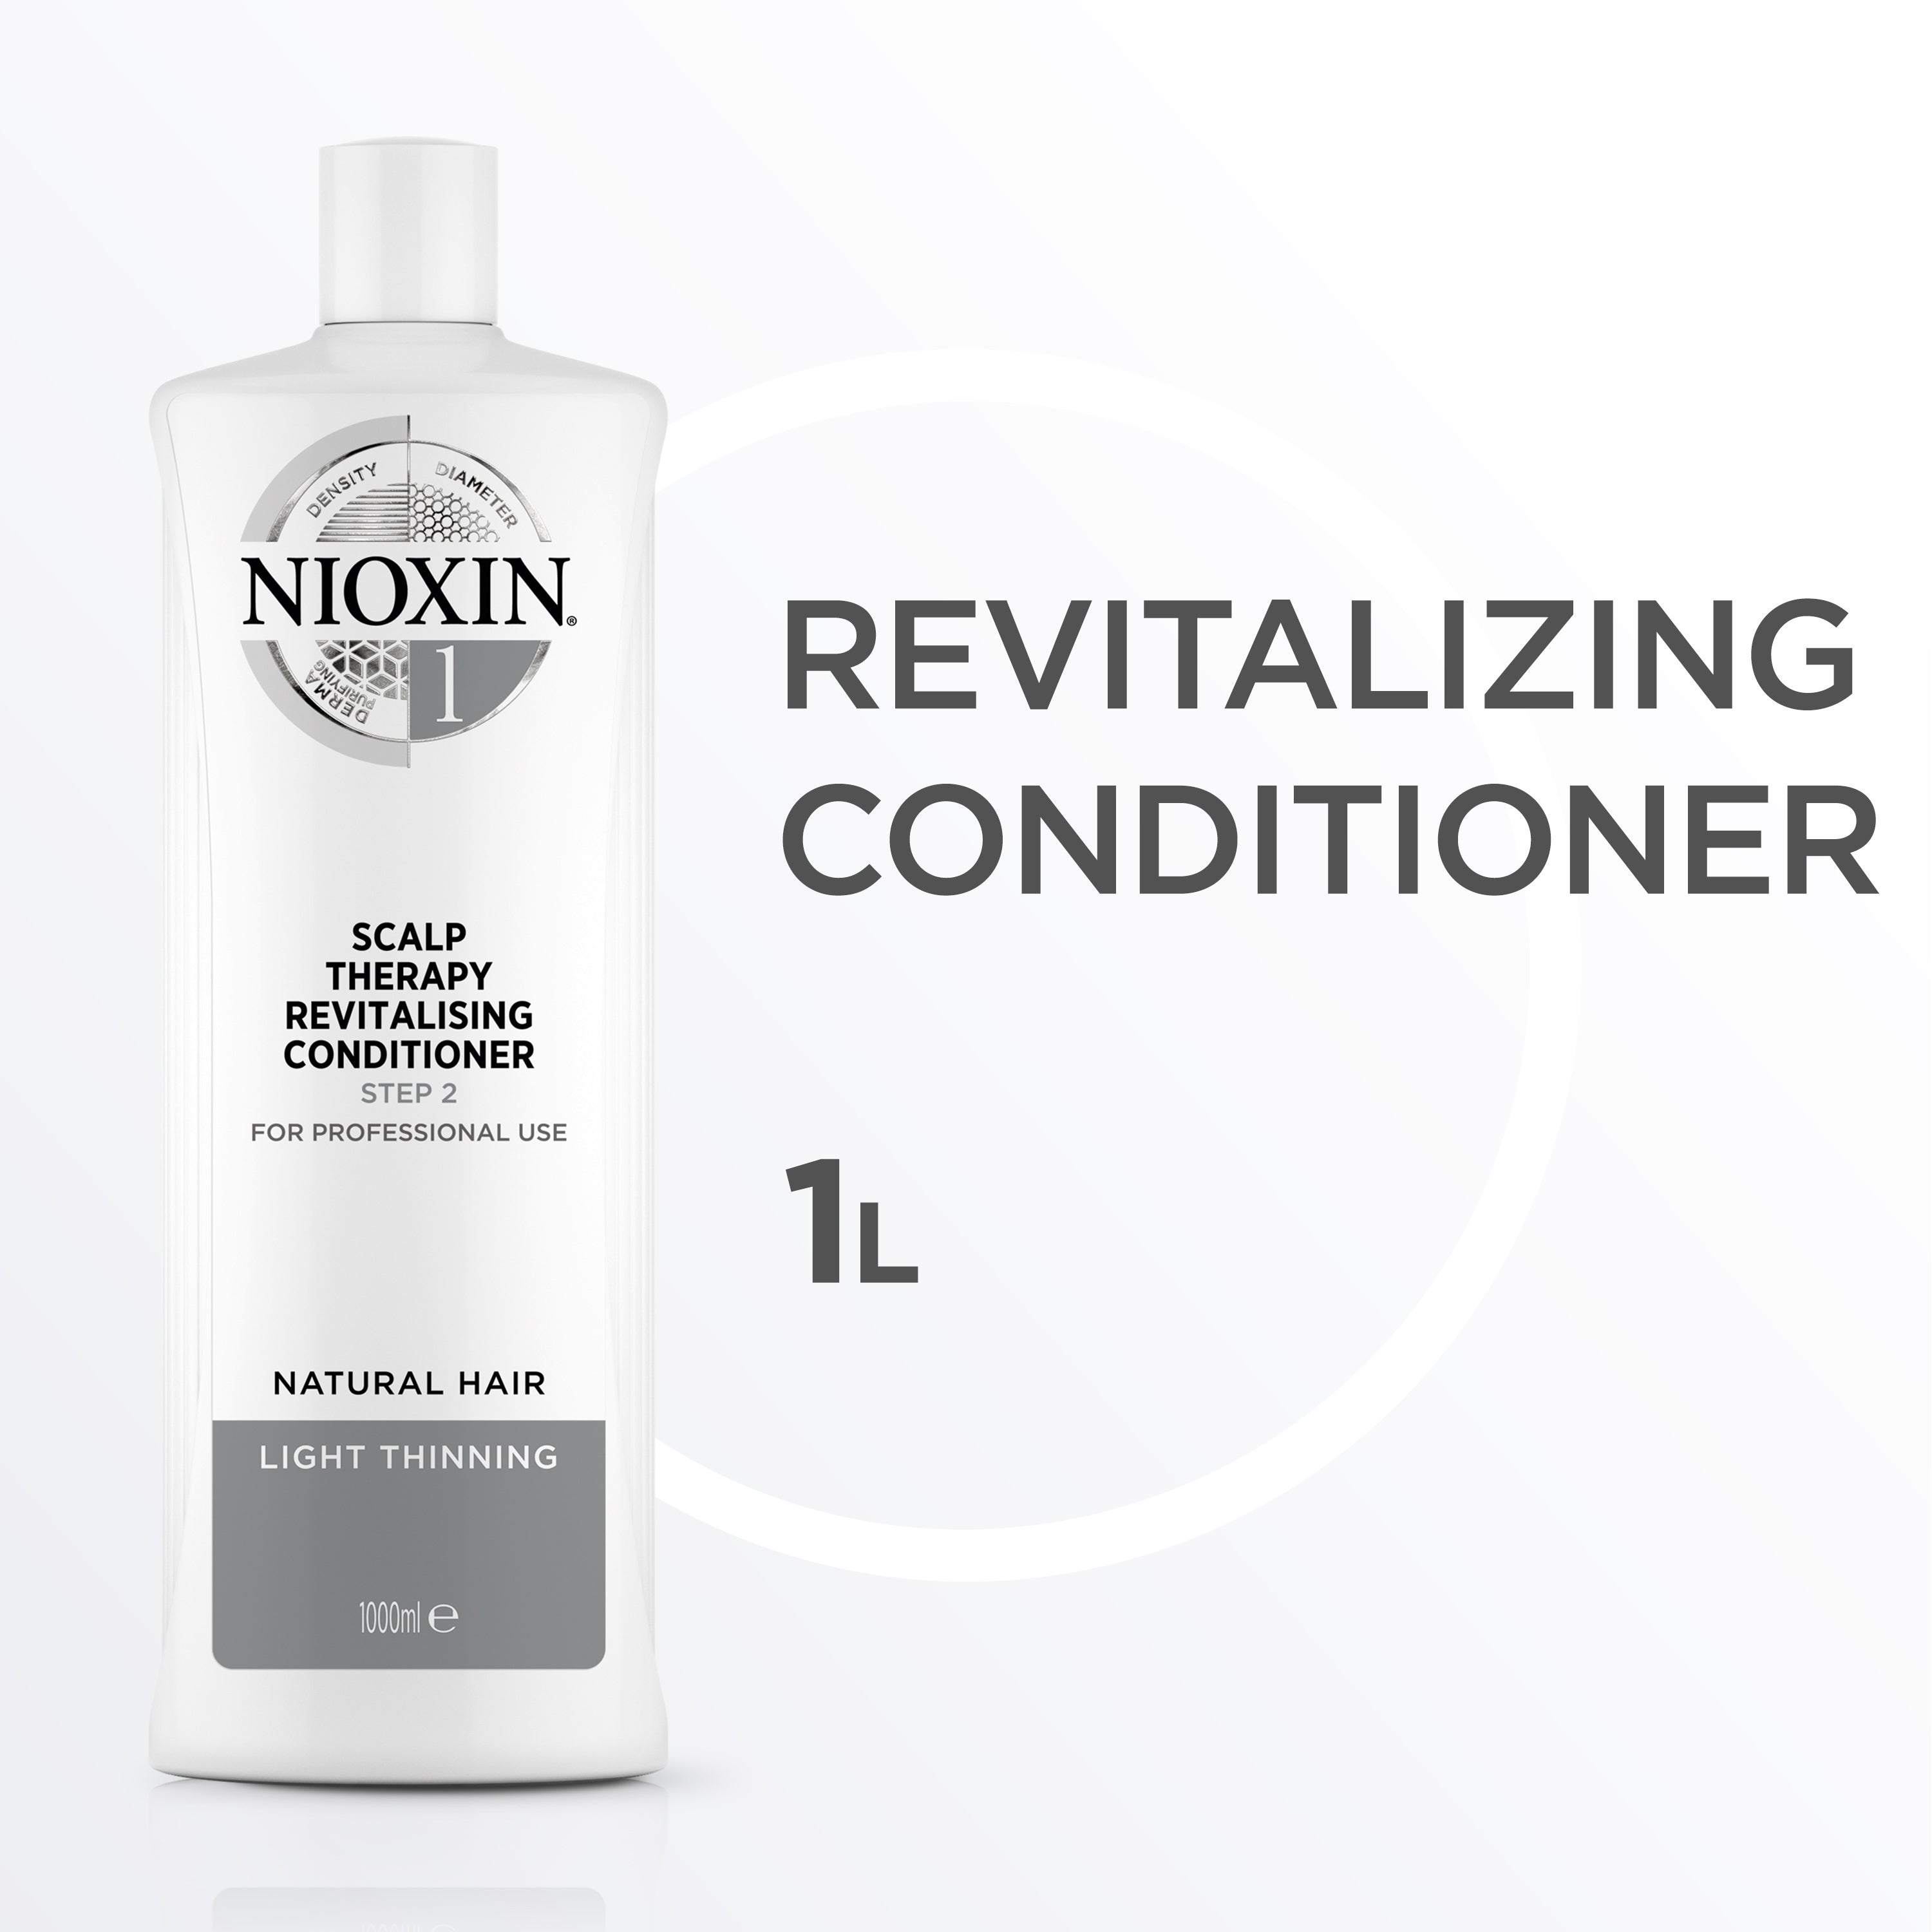 Nioxin Scalp Therapy Conditioner System 1 1000 ml